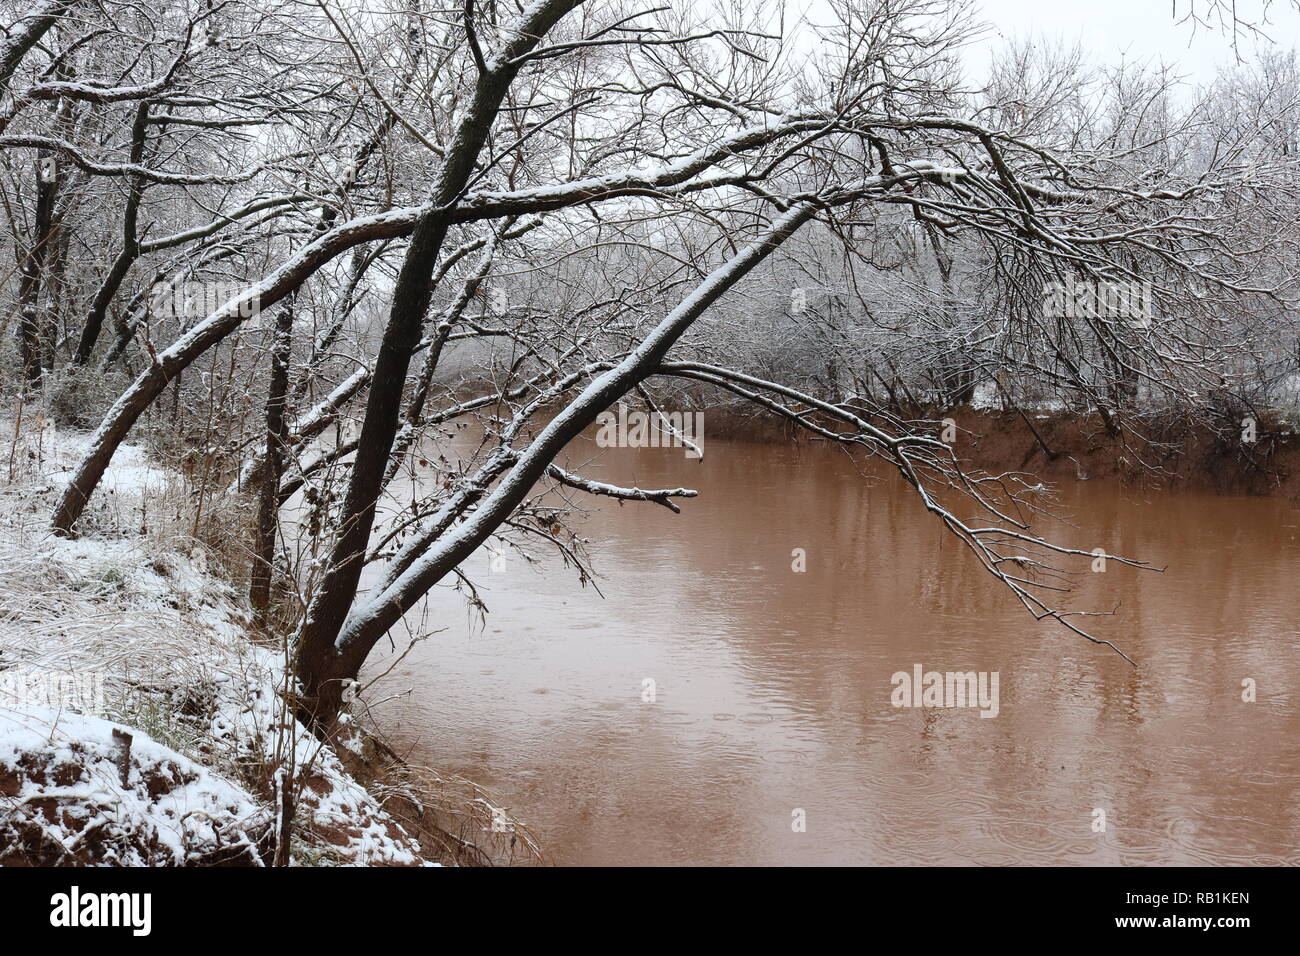 Trees covered in snow and ice on the banks of a red river Stock Photo